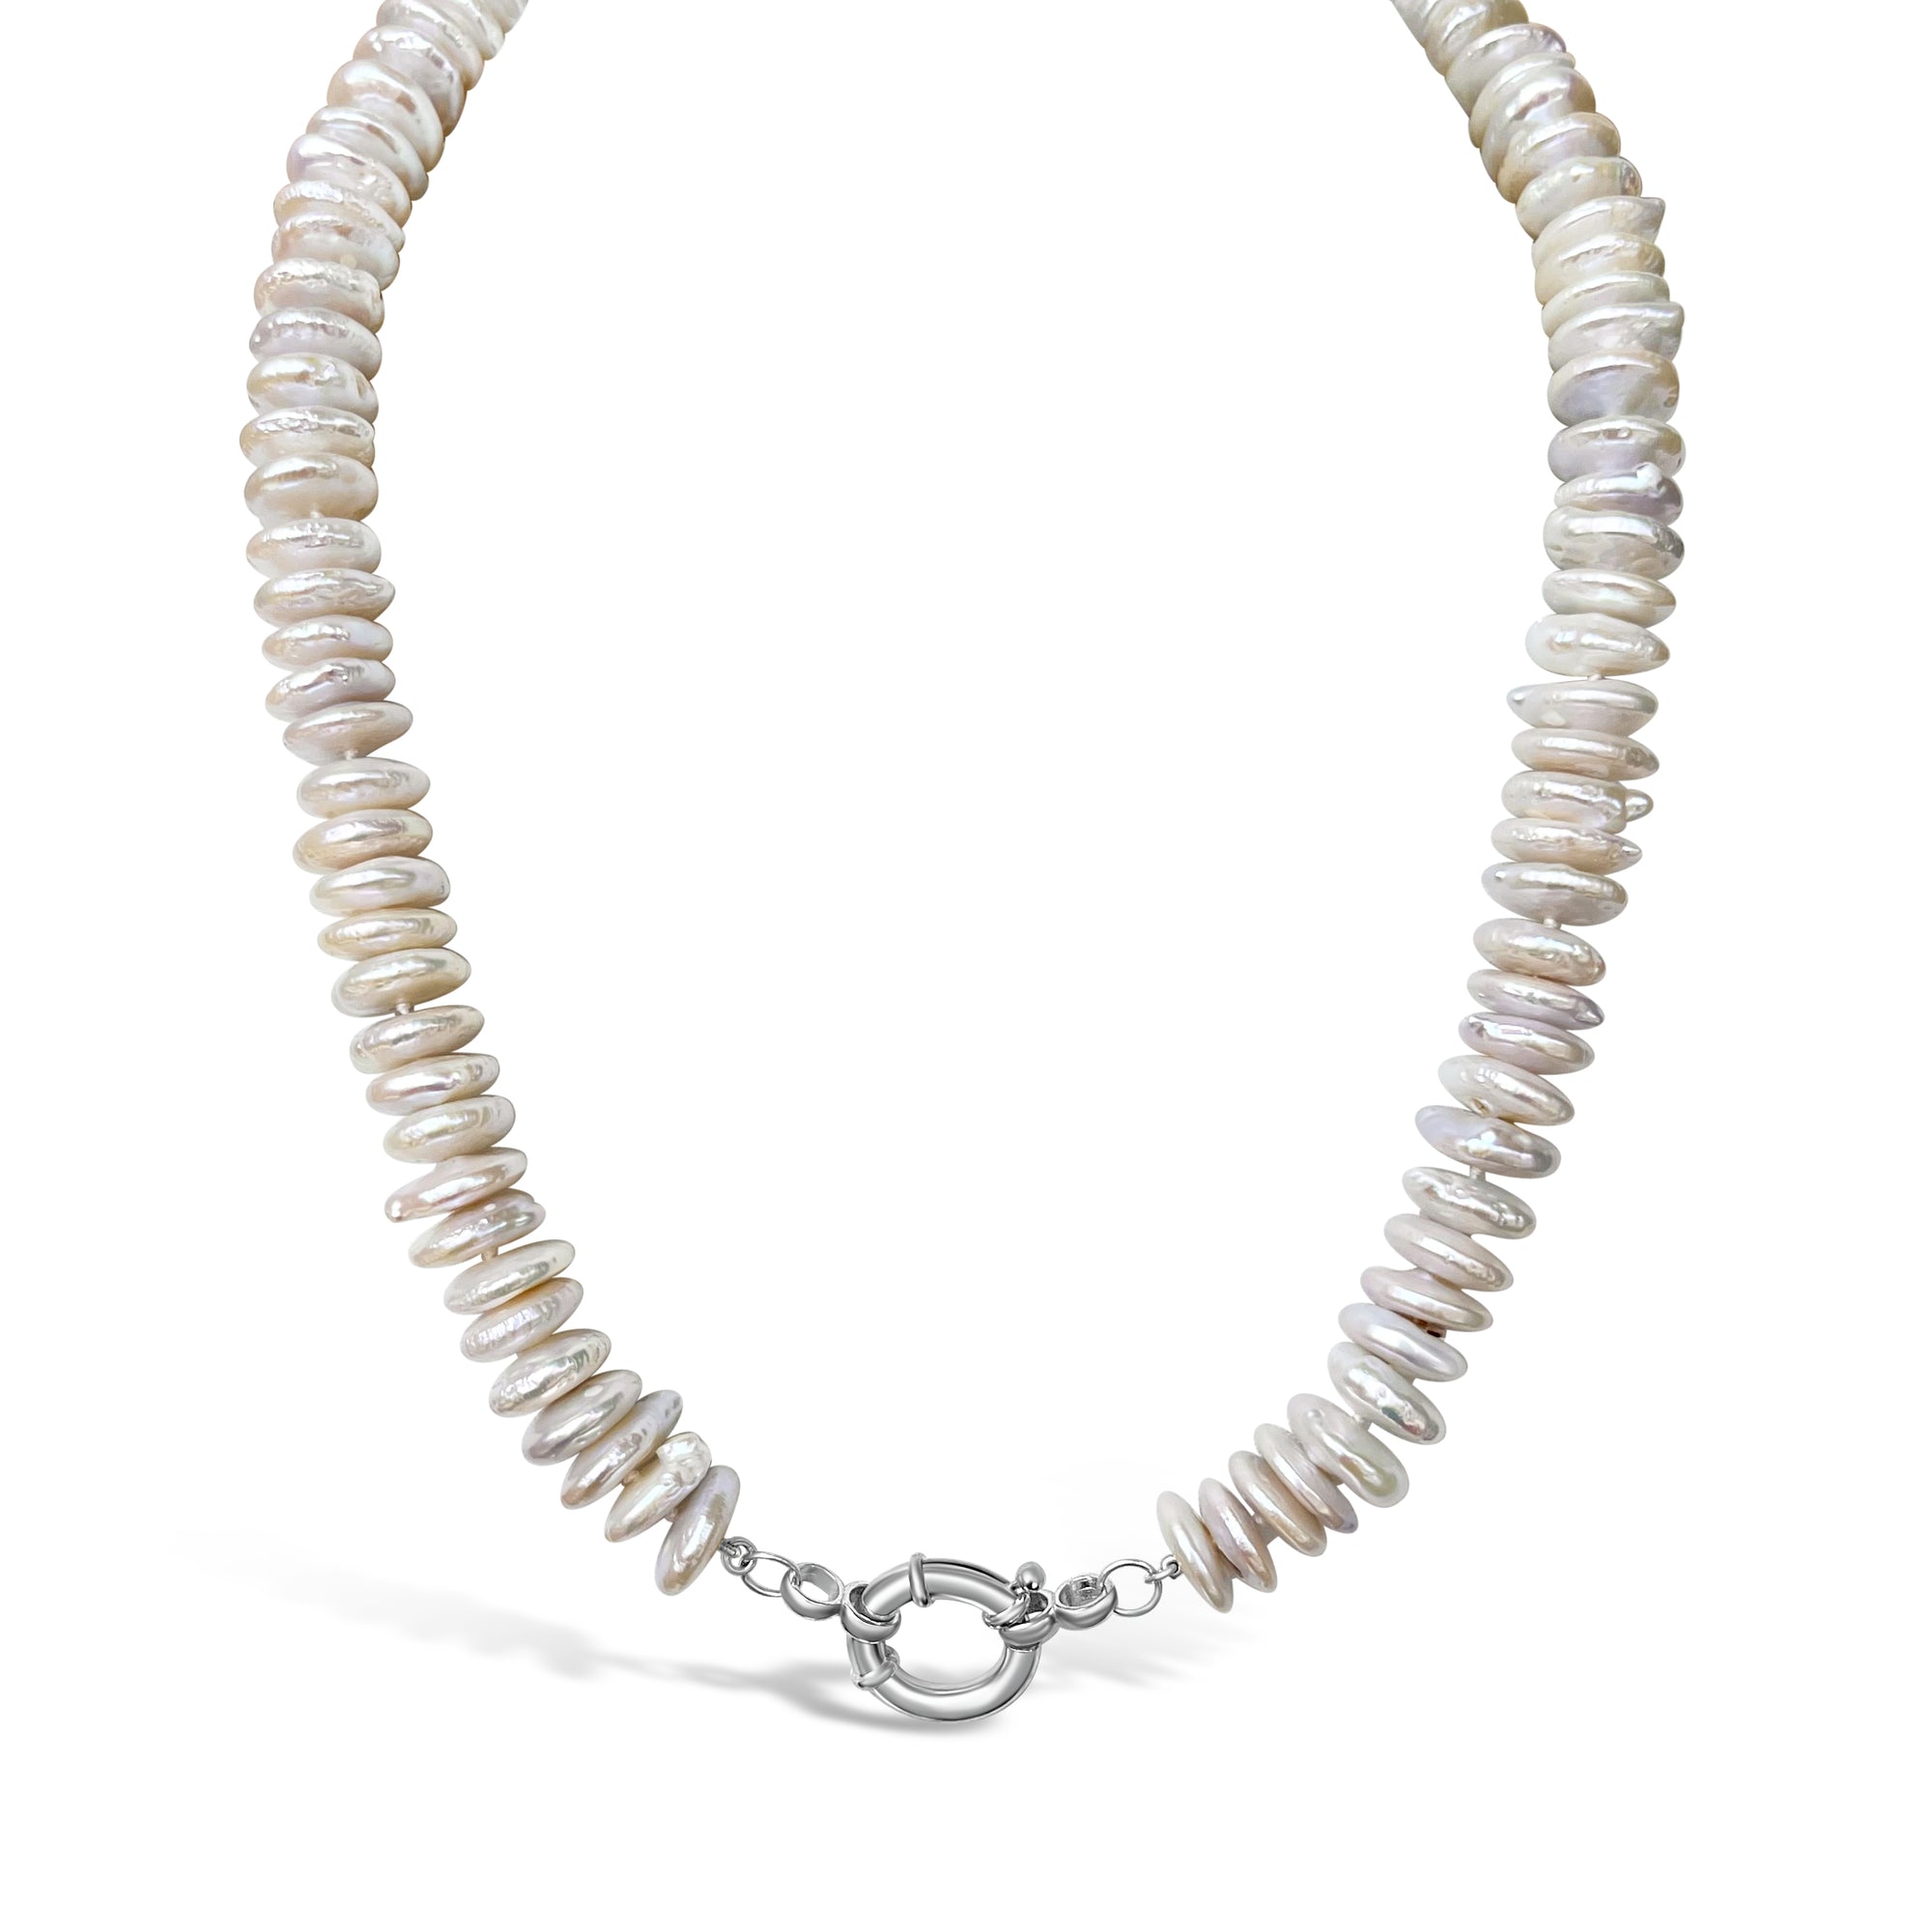 Astrological Gem Pearl Necklace For The Moon